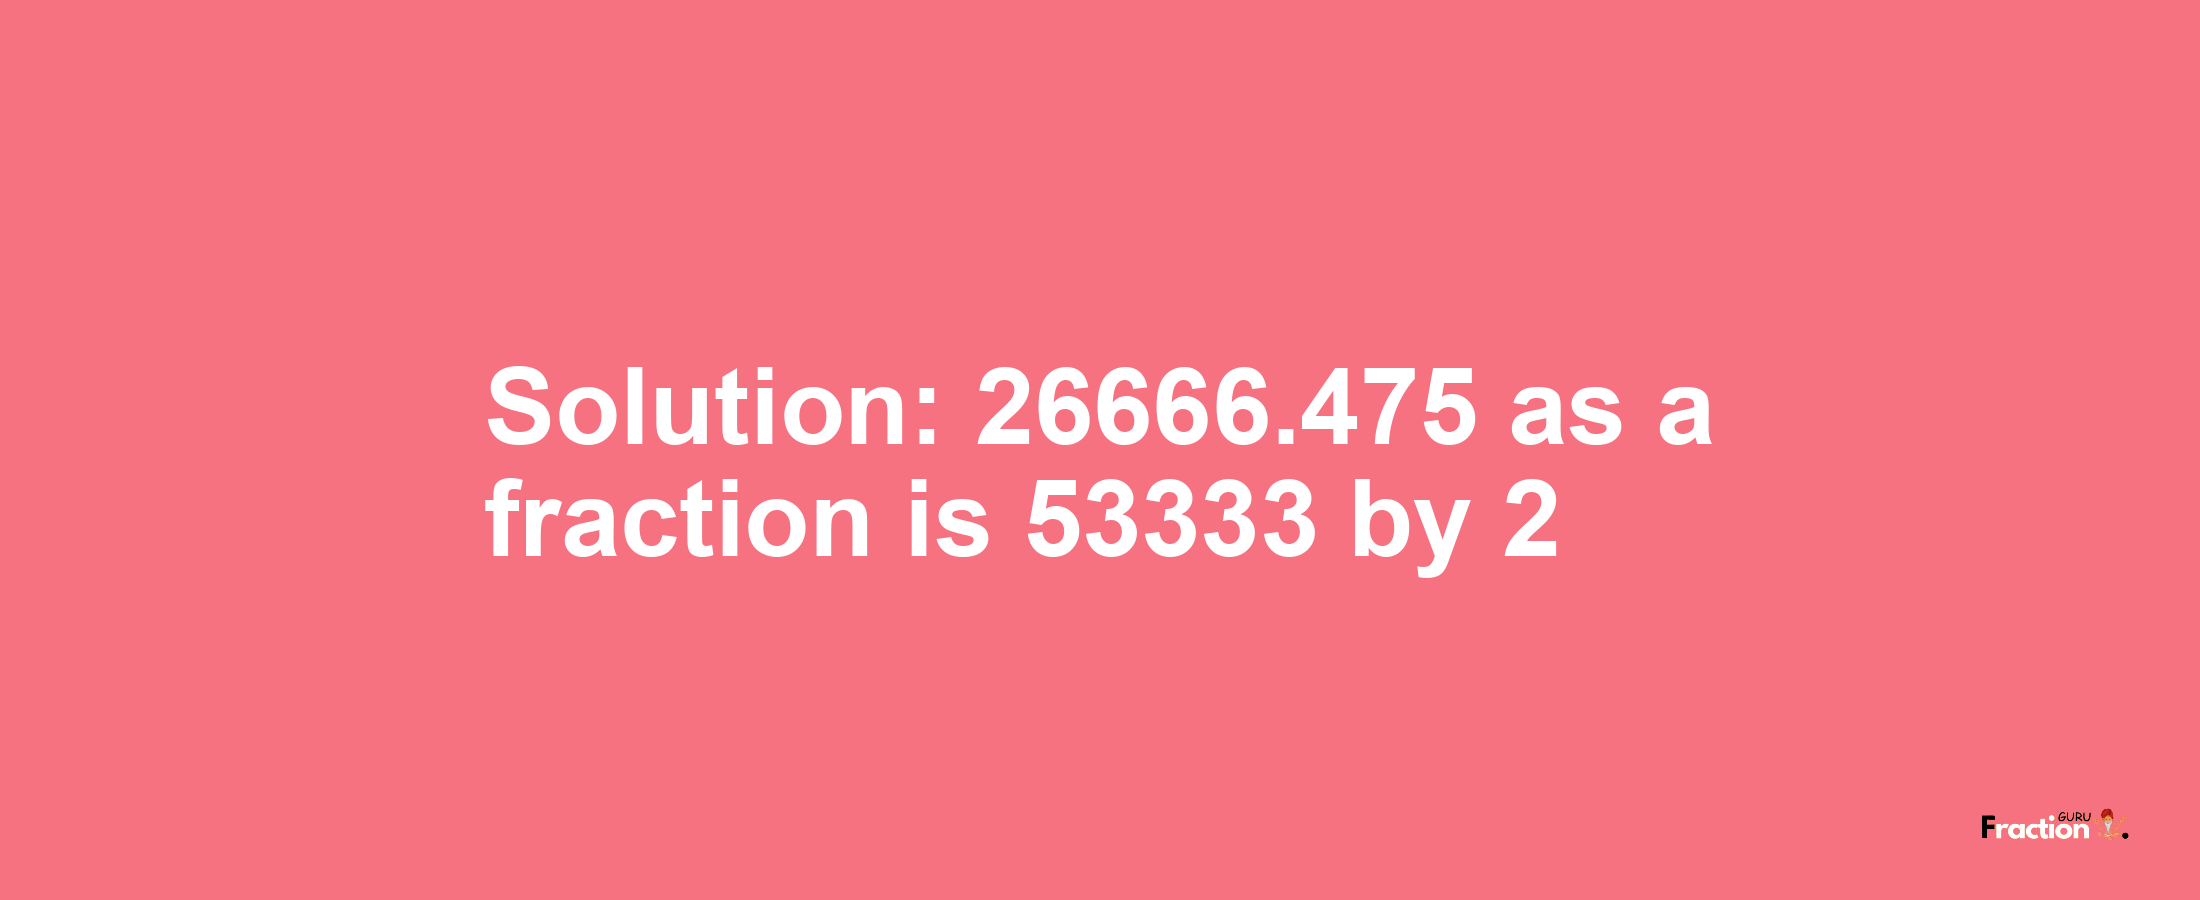 Solution:26666.475 as a fraction is 53333/2